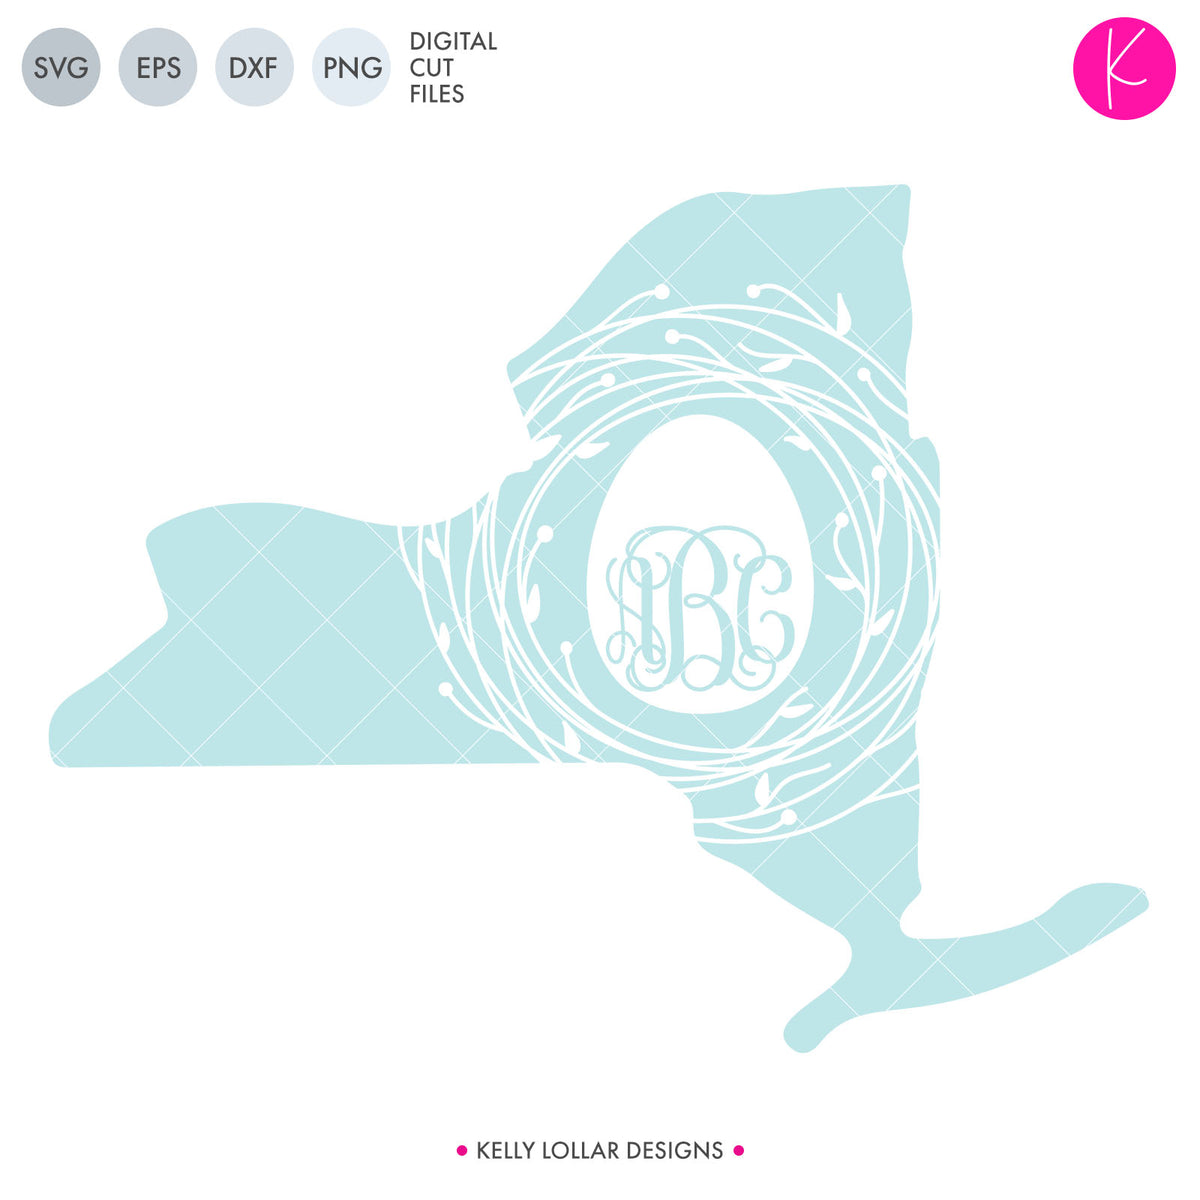 New York State Bundle | SVG DXF EPS PNG Cut Files